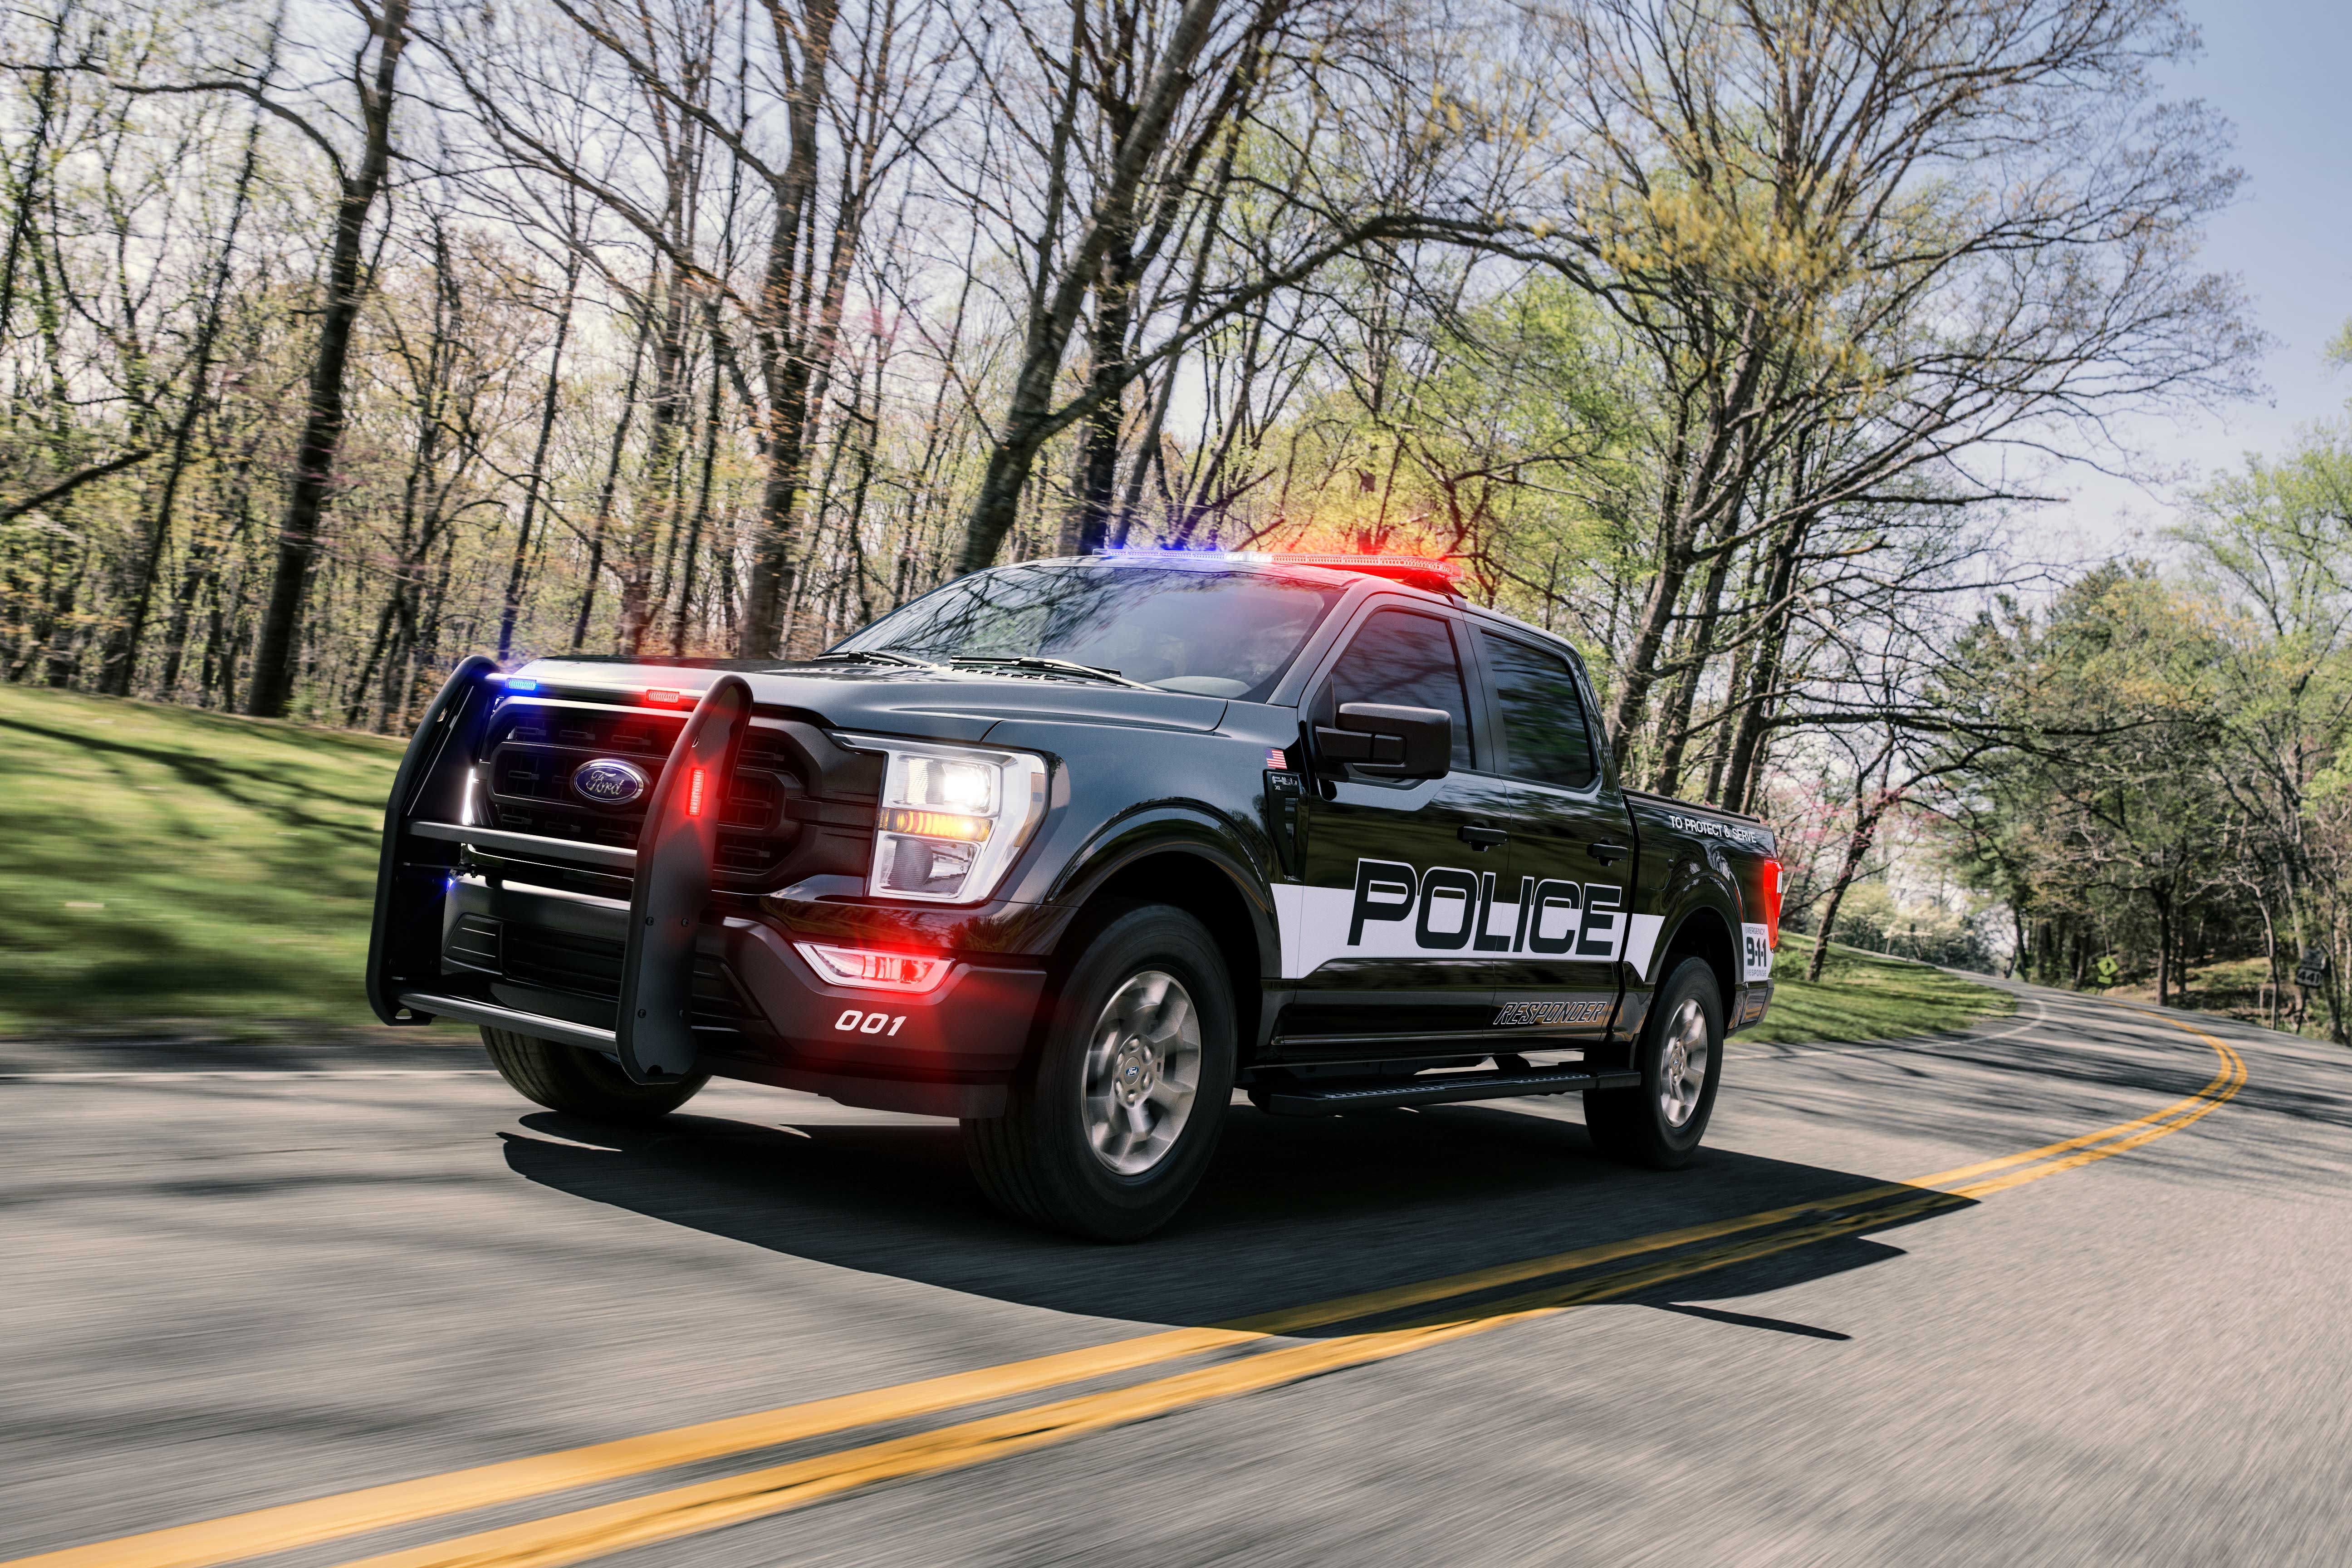 Meet the new Ford F-150 police pickup truck